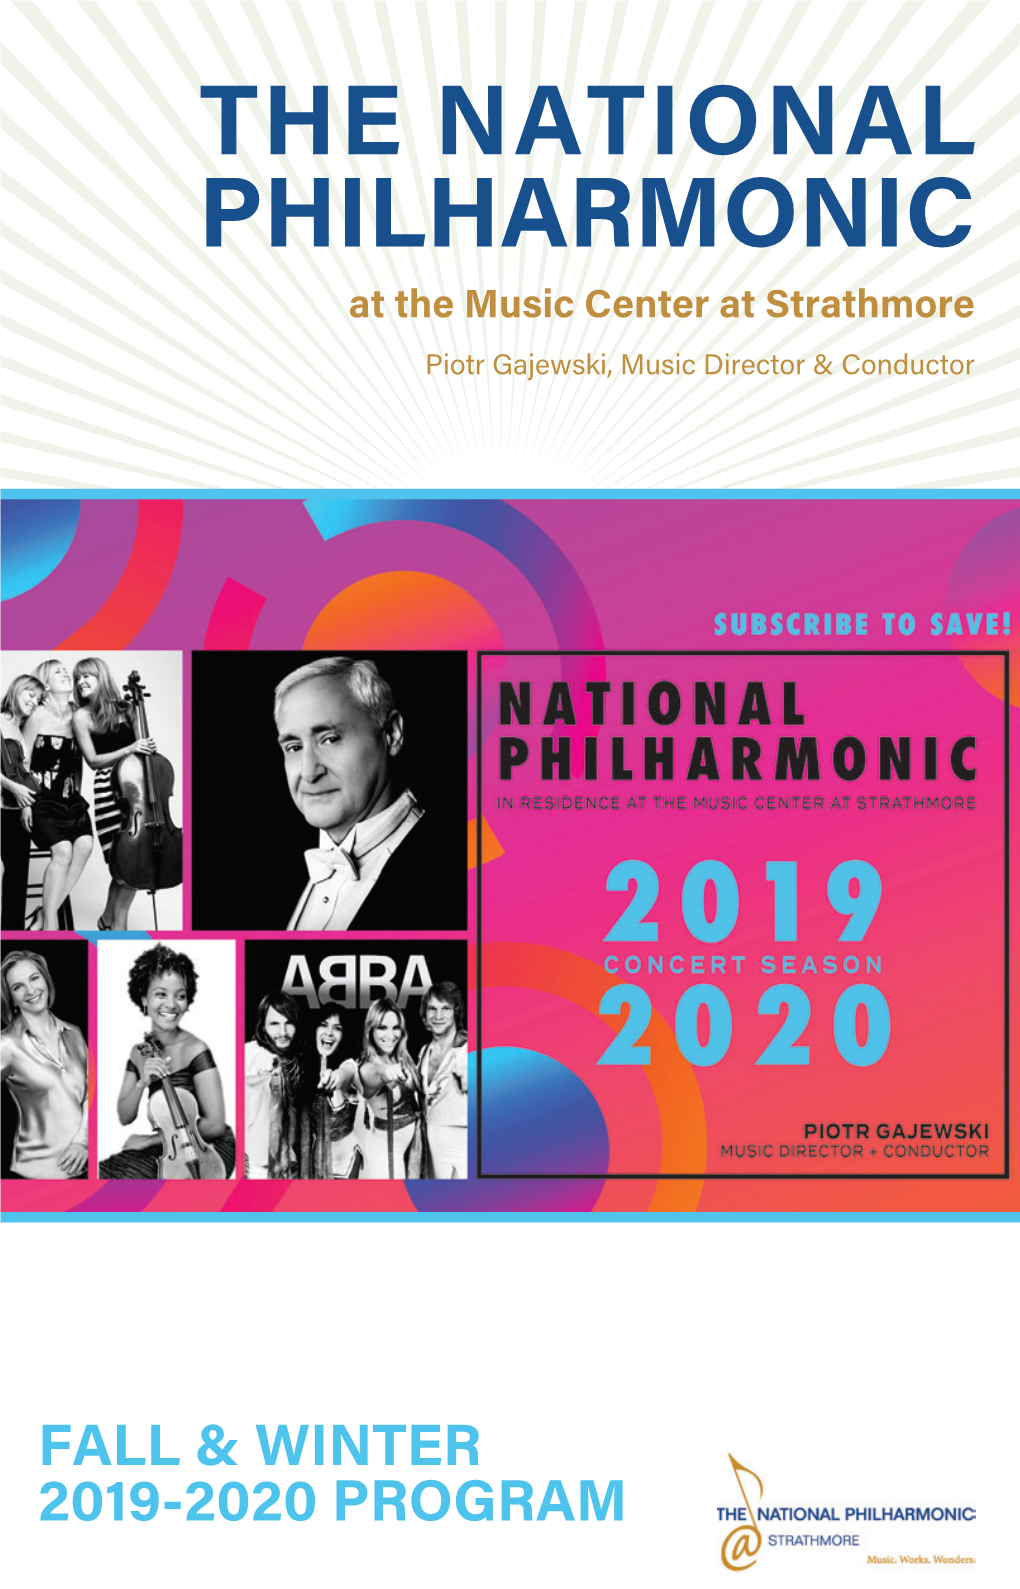 THE NATIONAL PHILHARMONIC at the Music Center at Strathmore Piotr Gajewski, Music Director & Conductor